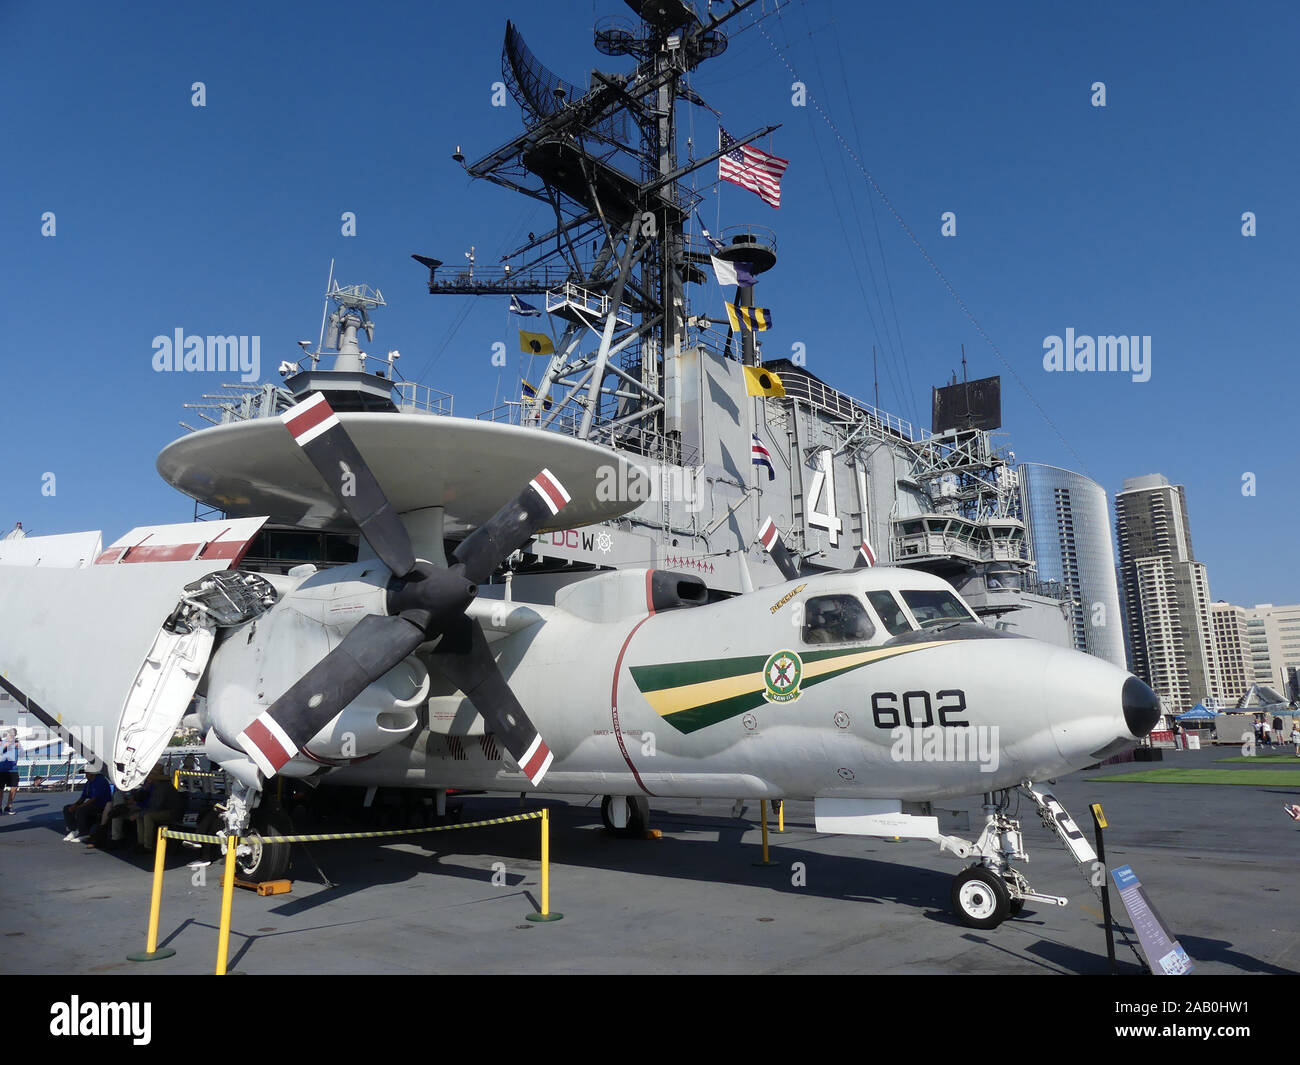 USS MIDWAY aircraft carrier museum in San Diego harbour, California. Photo: Tony Gale Stock Photo